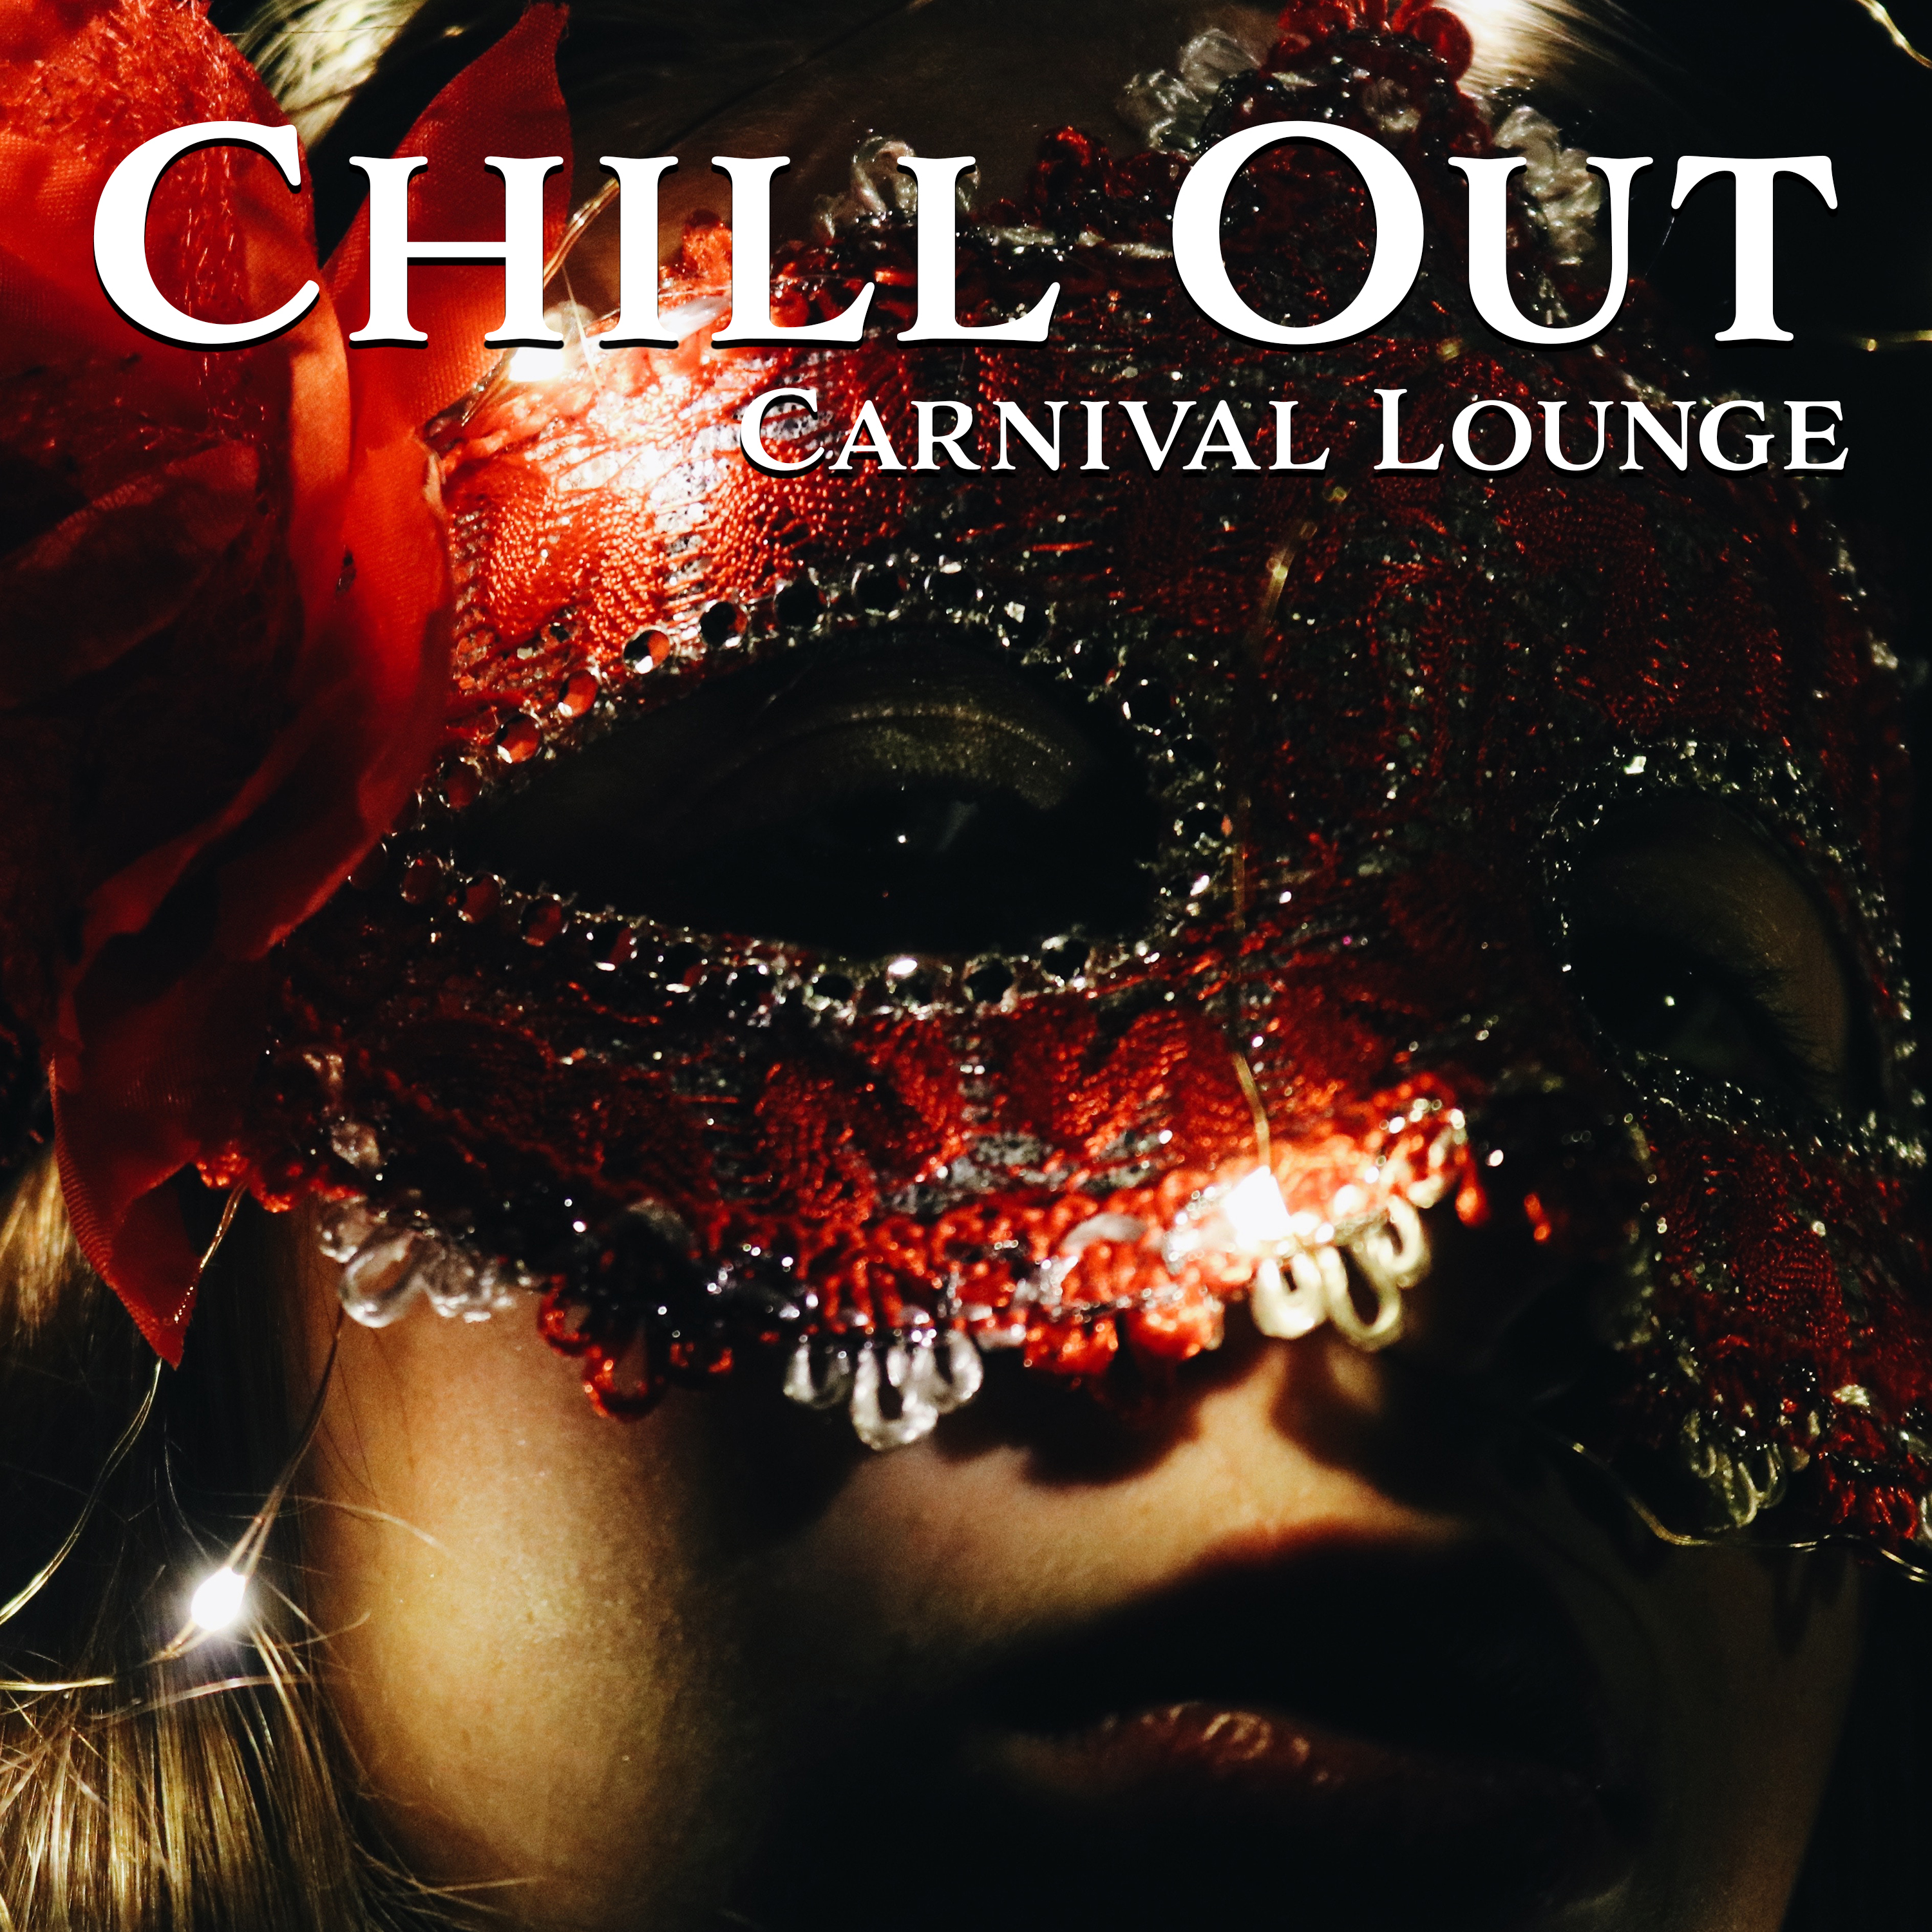 Chill Out Carnival Lounge